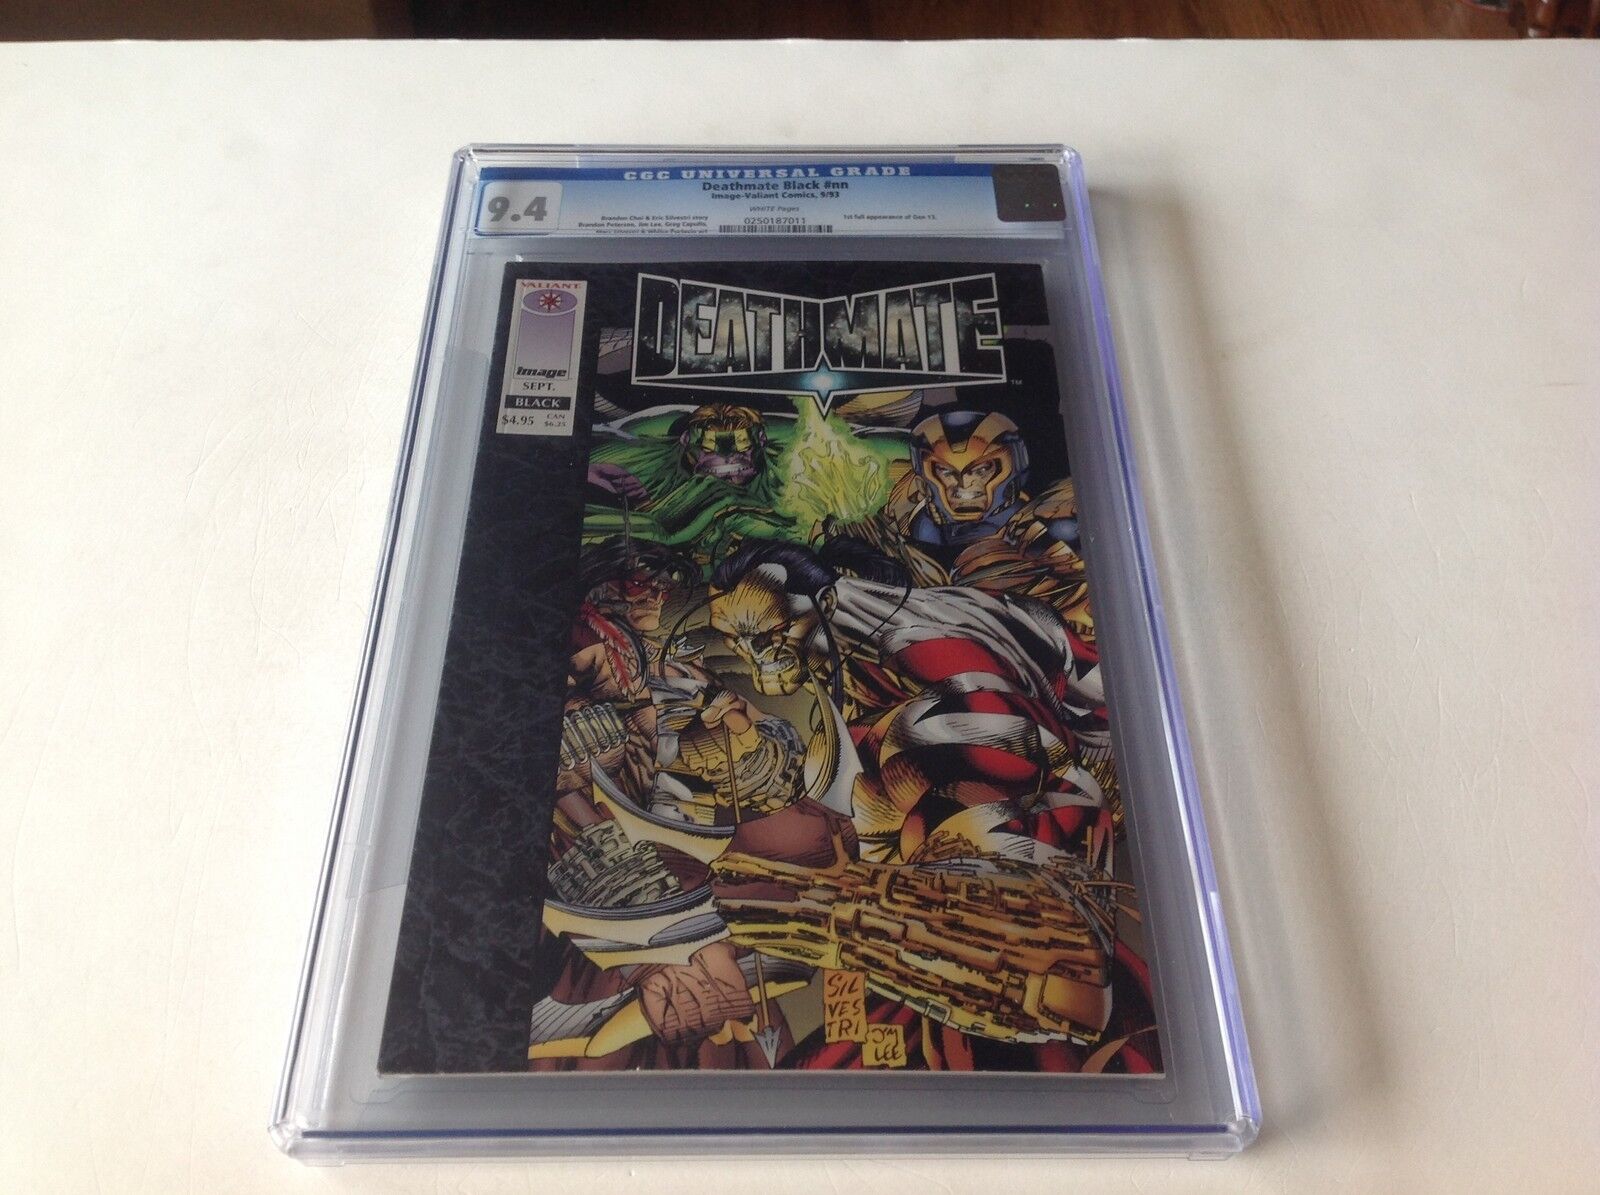 DEATHMATE BLACK #NN CGC 9.4 WHITE PAGES 1ST FULL APPEARANCE GEN 13 IMAGE COMICS